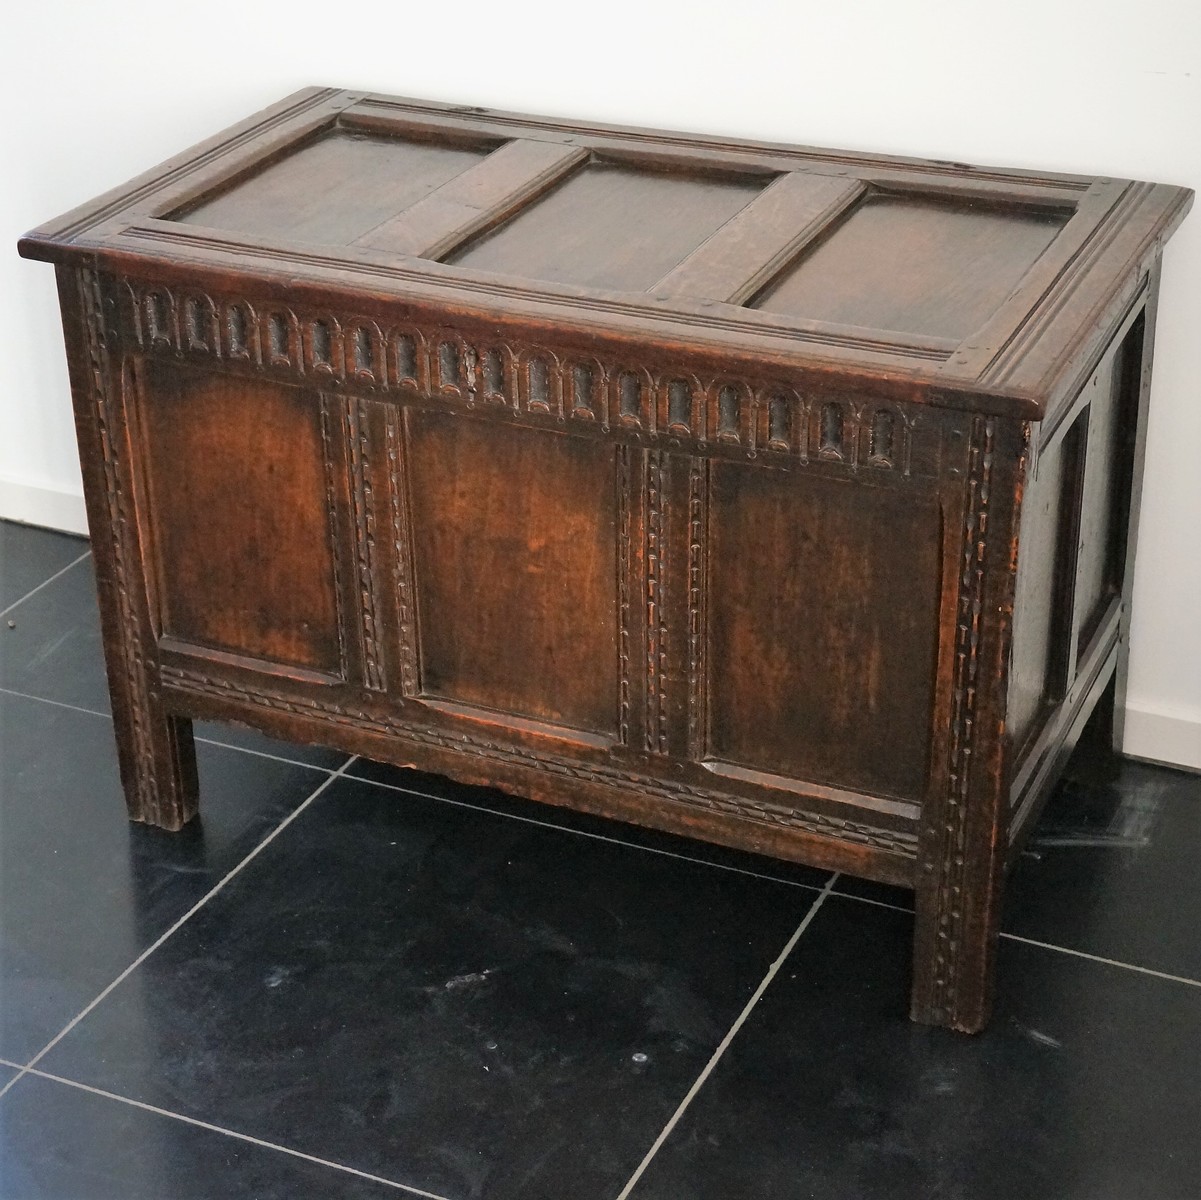 late 17th century A Late 17th Century Small Oak Chest With Nice Panels And Color